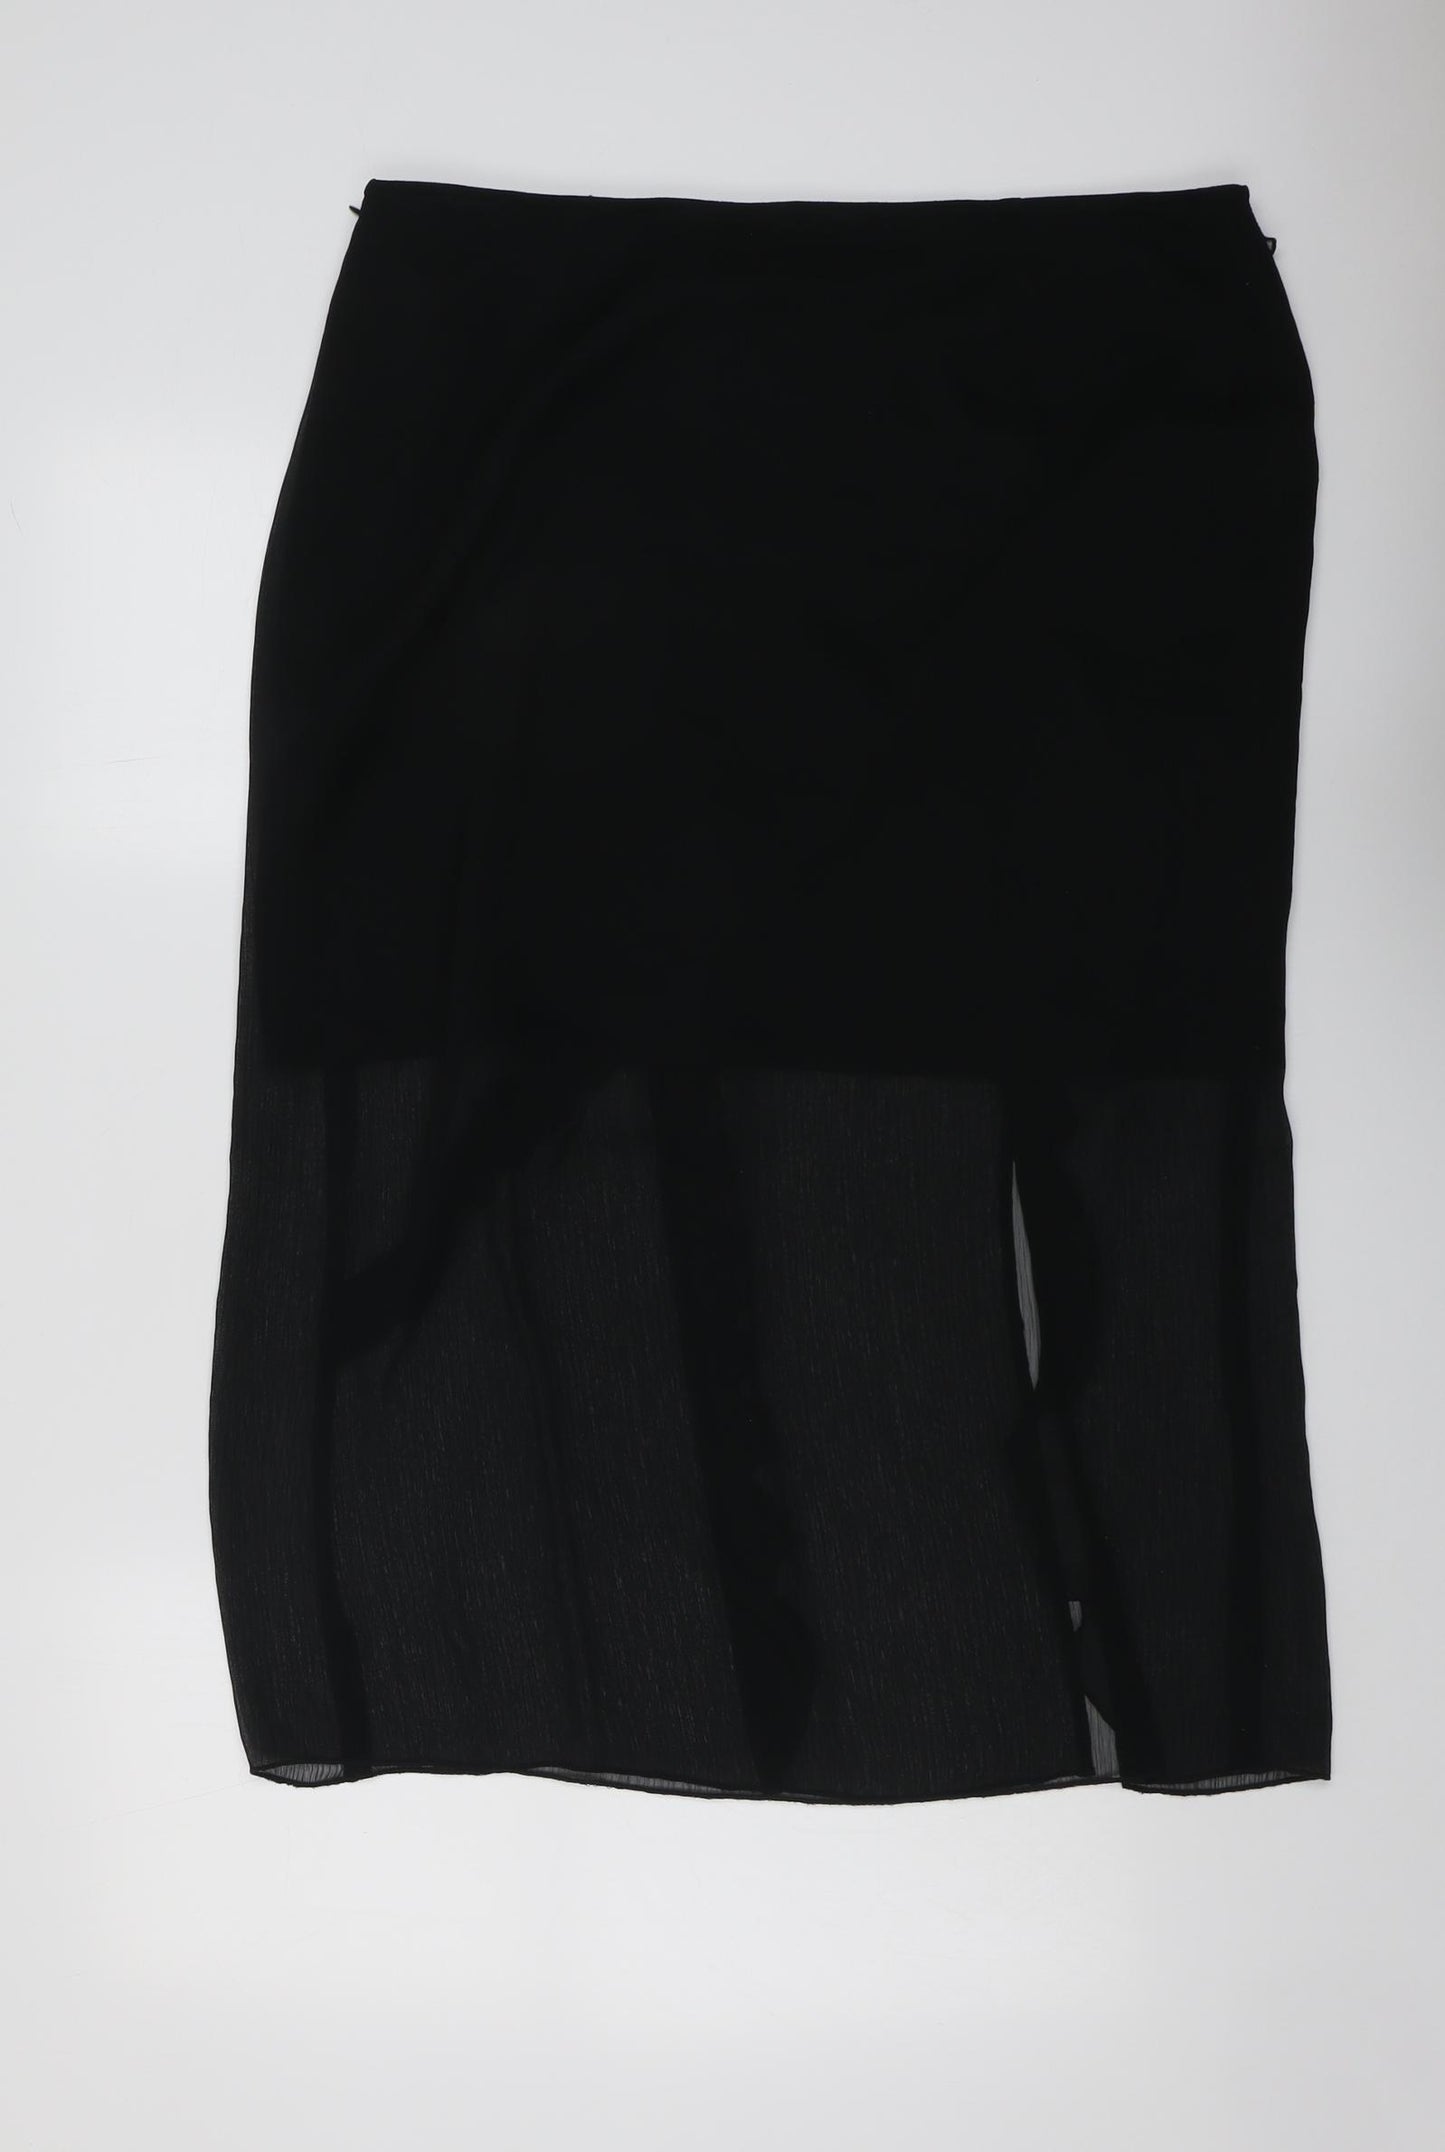 Marks and Spencer Womens Black Polyester A-Line Skirt Size 18 Zip - Sheer overlay